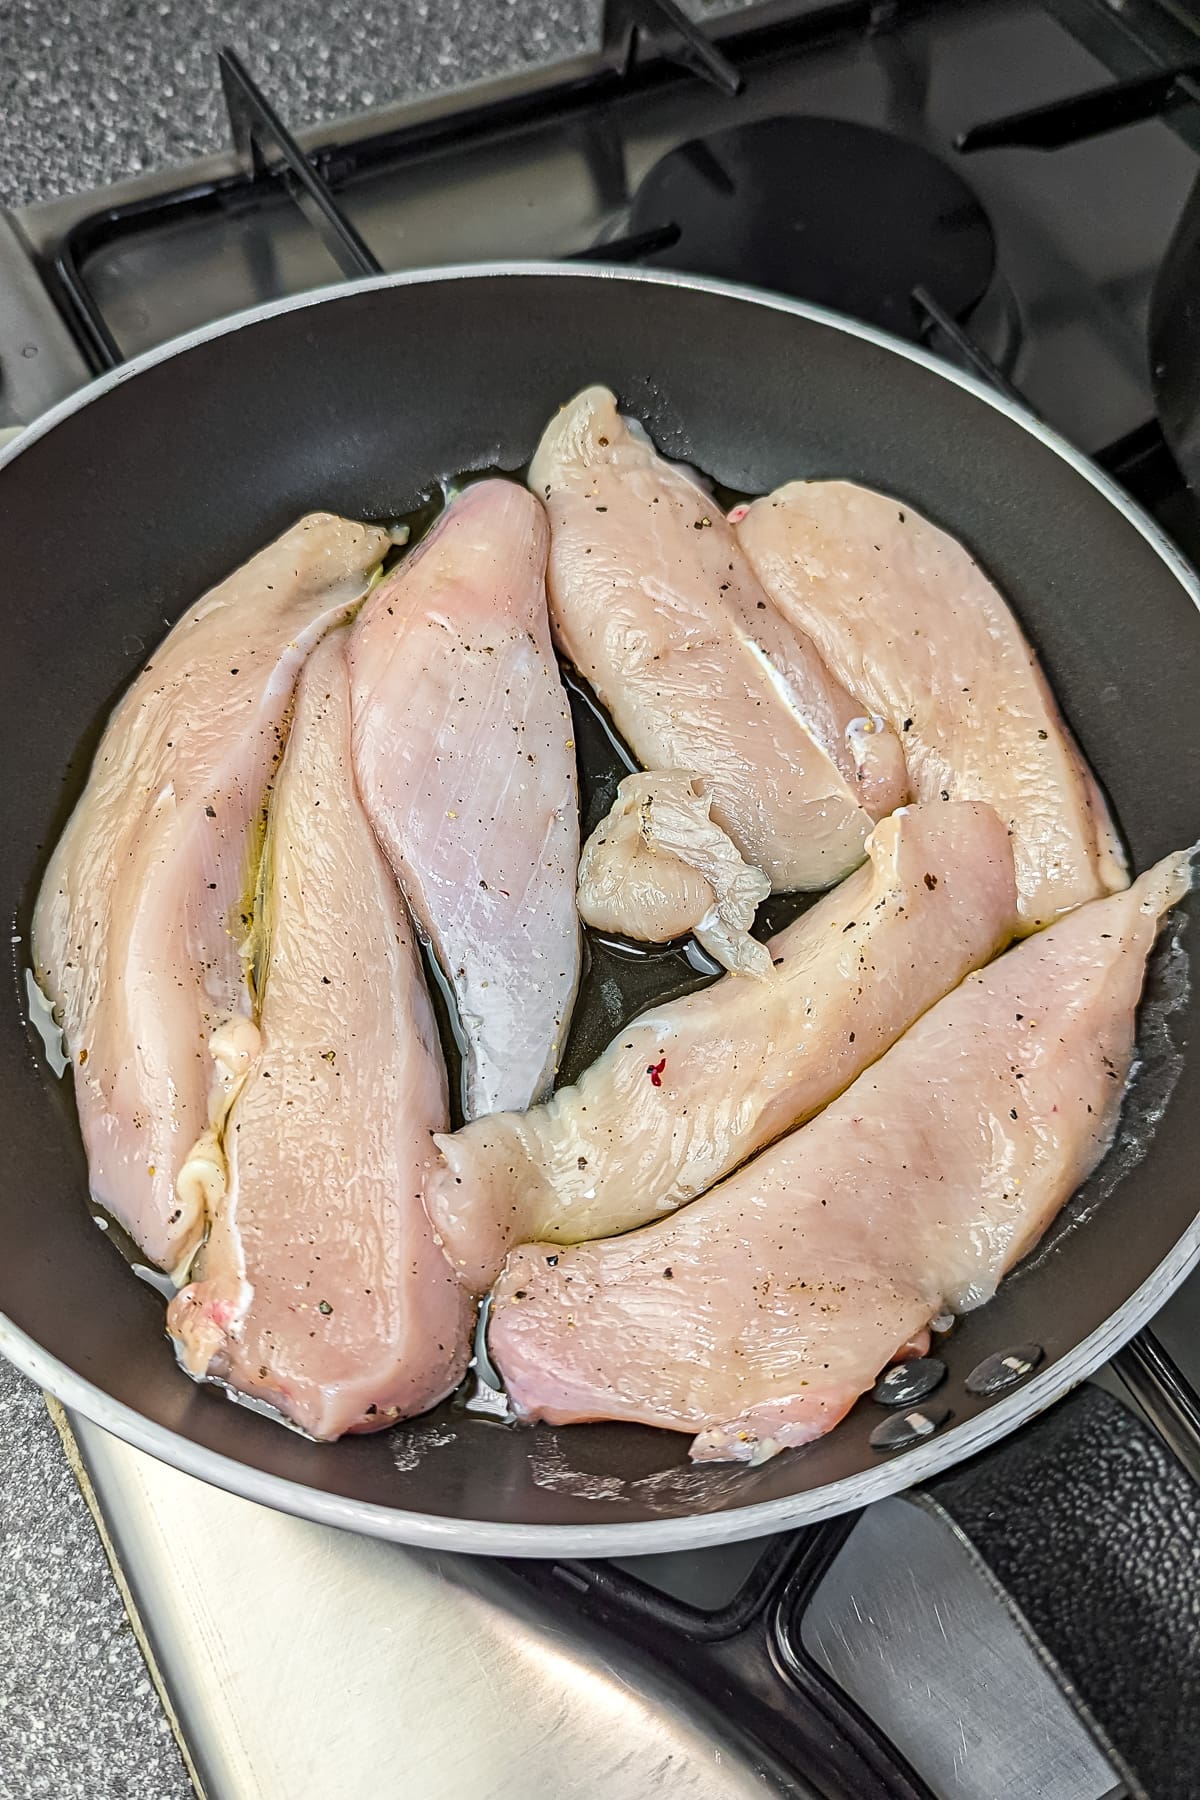 Raw chicken strips seasoned with herbs cooking in a black skillet on a stovetop.